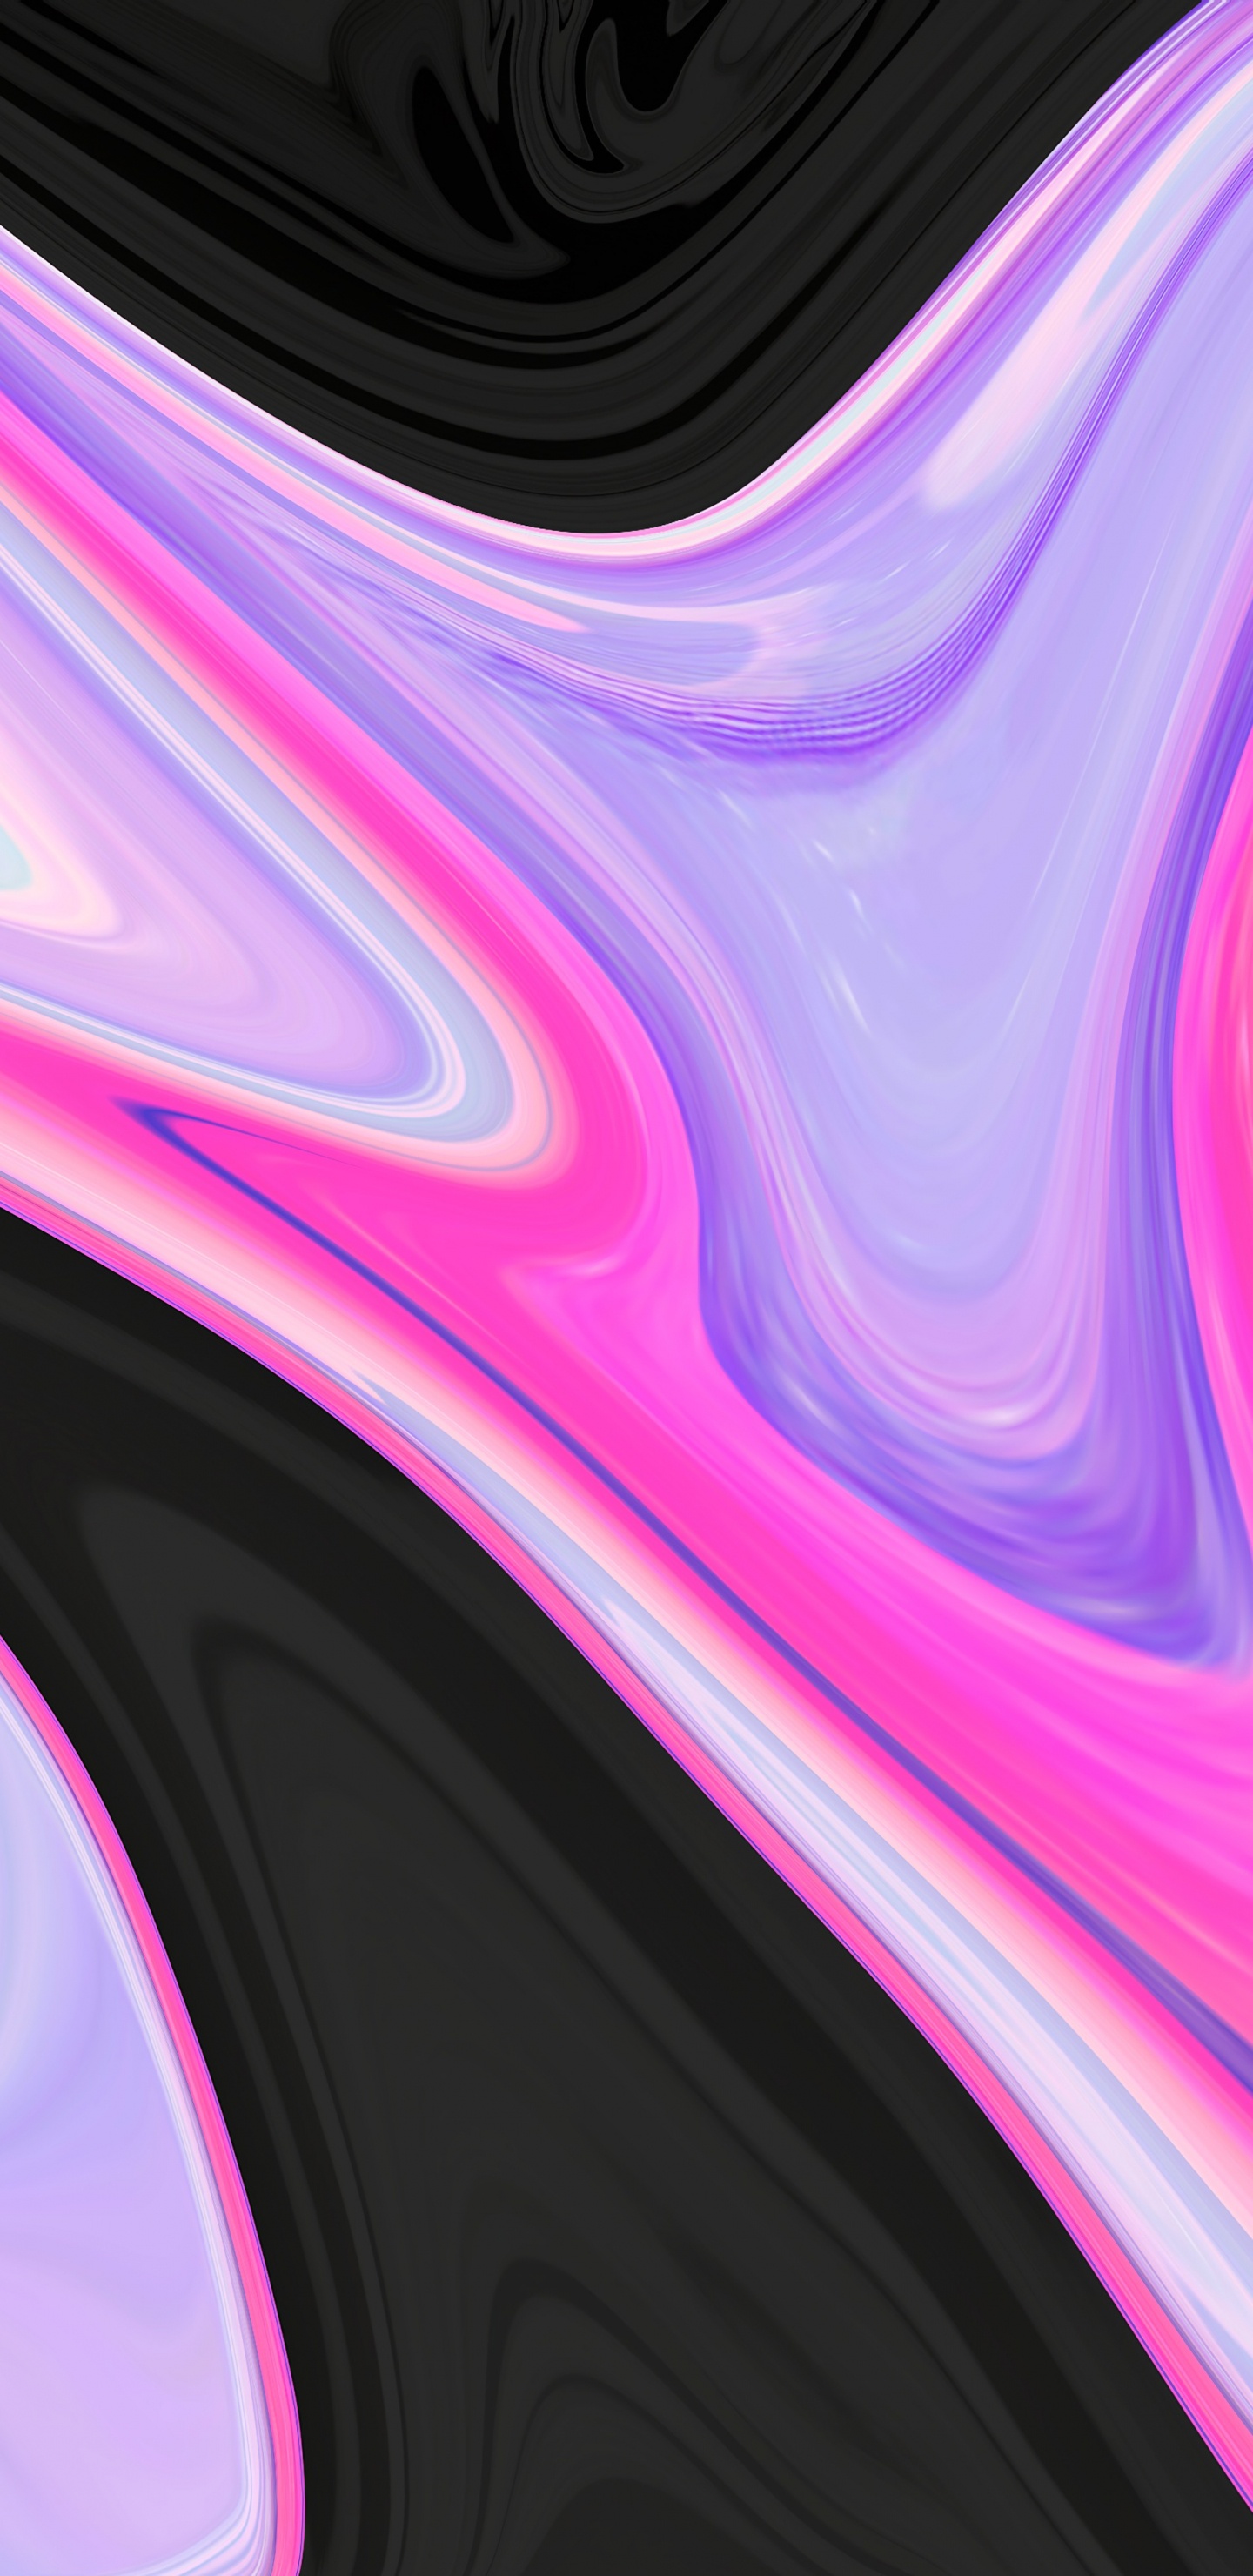 Purple and Black Abstract Painting. Wallpaper in 1440x2960 Resolution